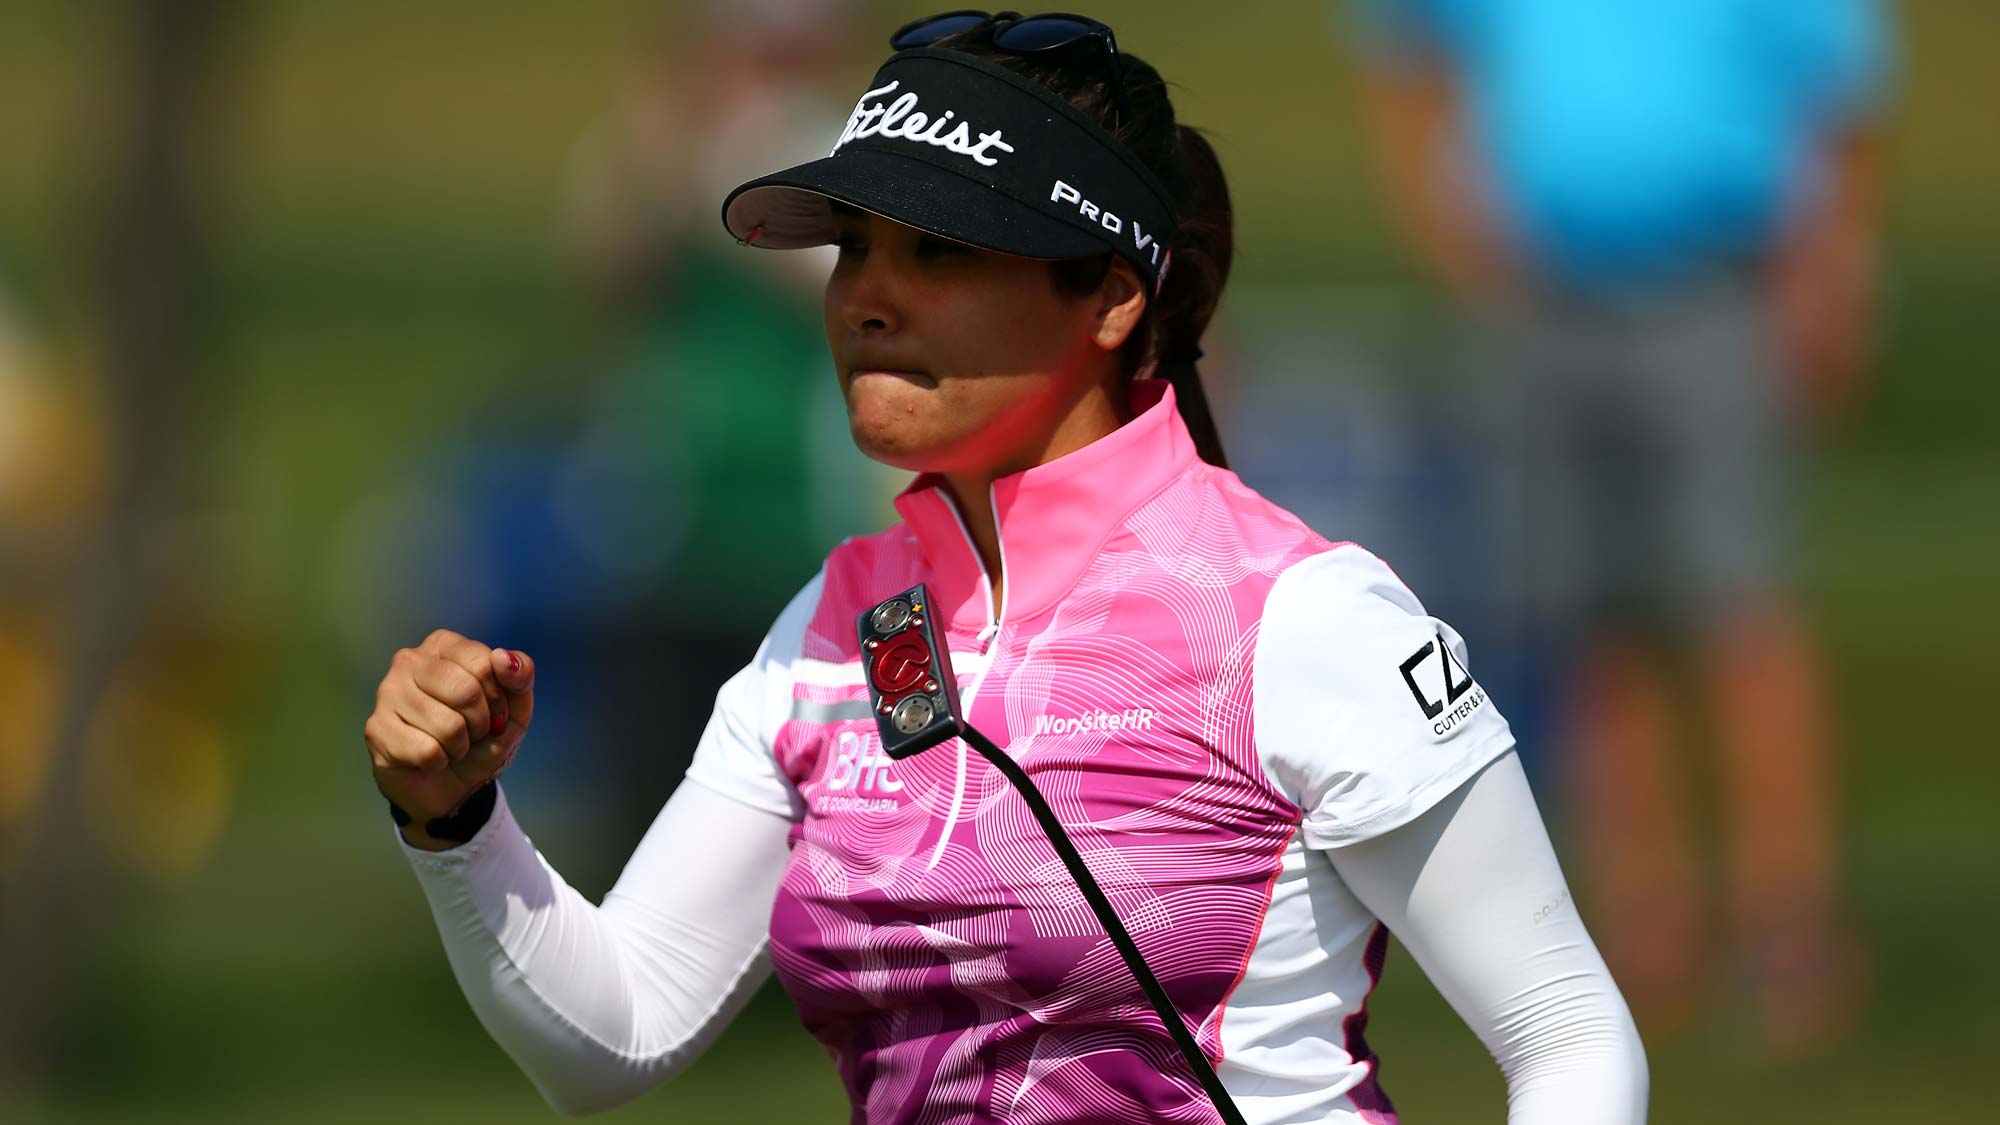 Mariajo Uribe of Colombia reacts after sinking a long put on the ninth green during the first round of the CP Womens Open